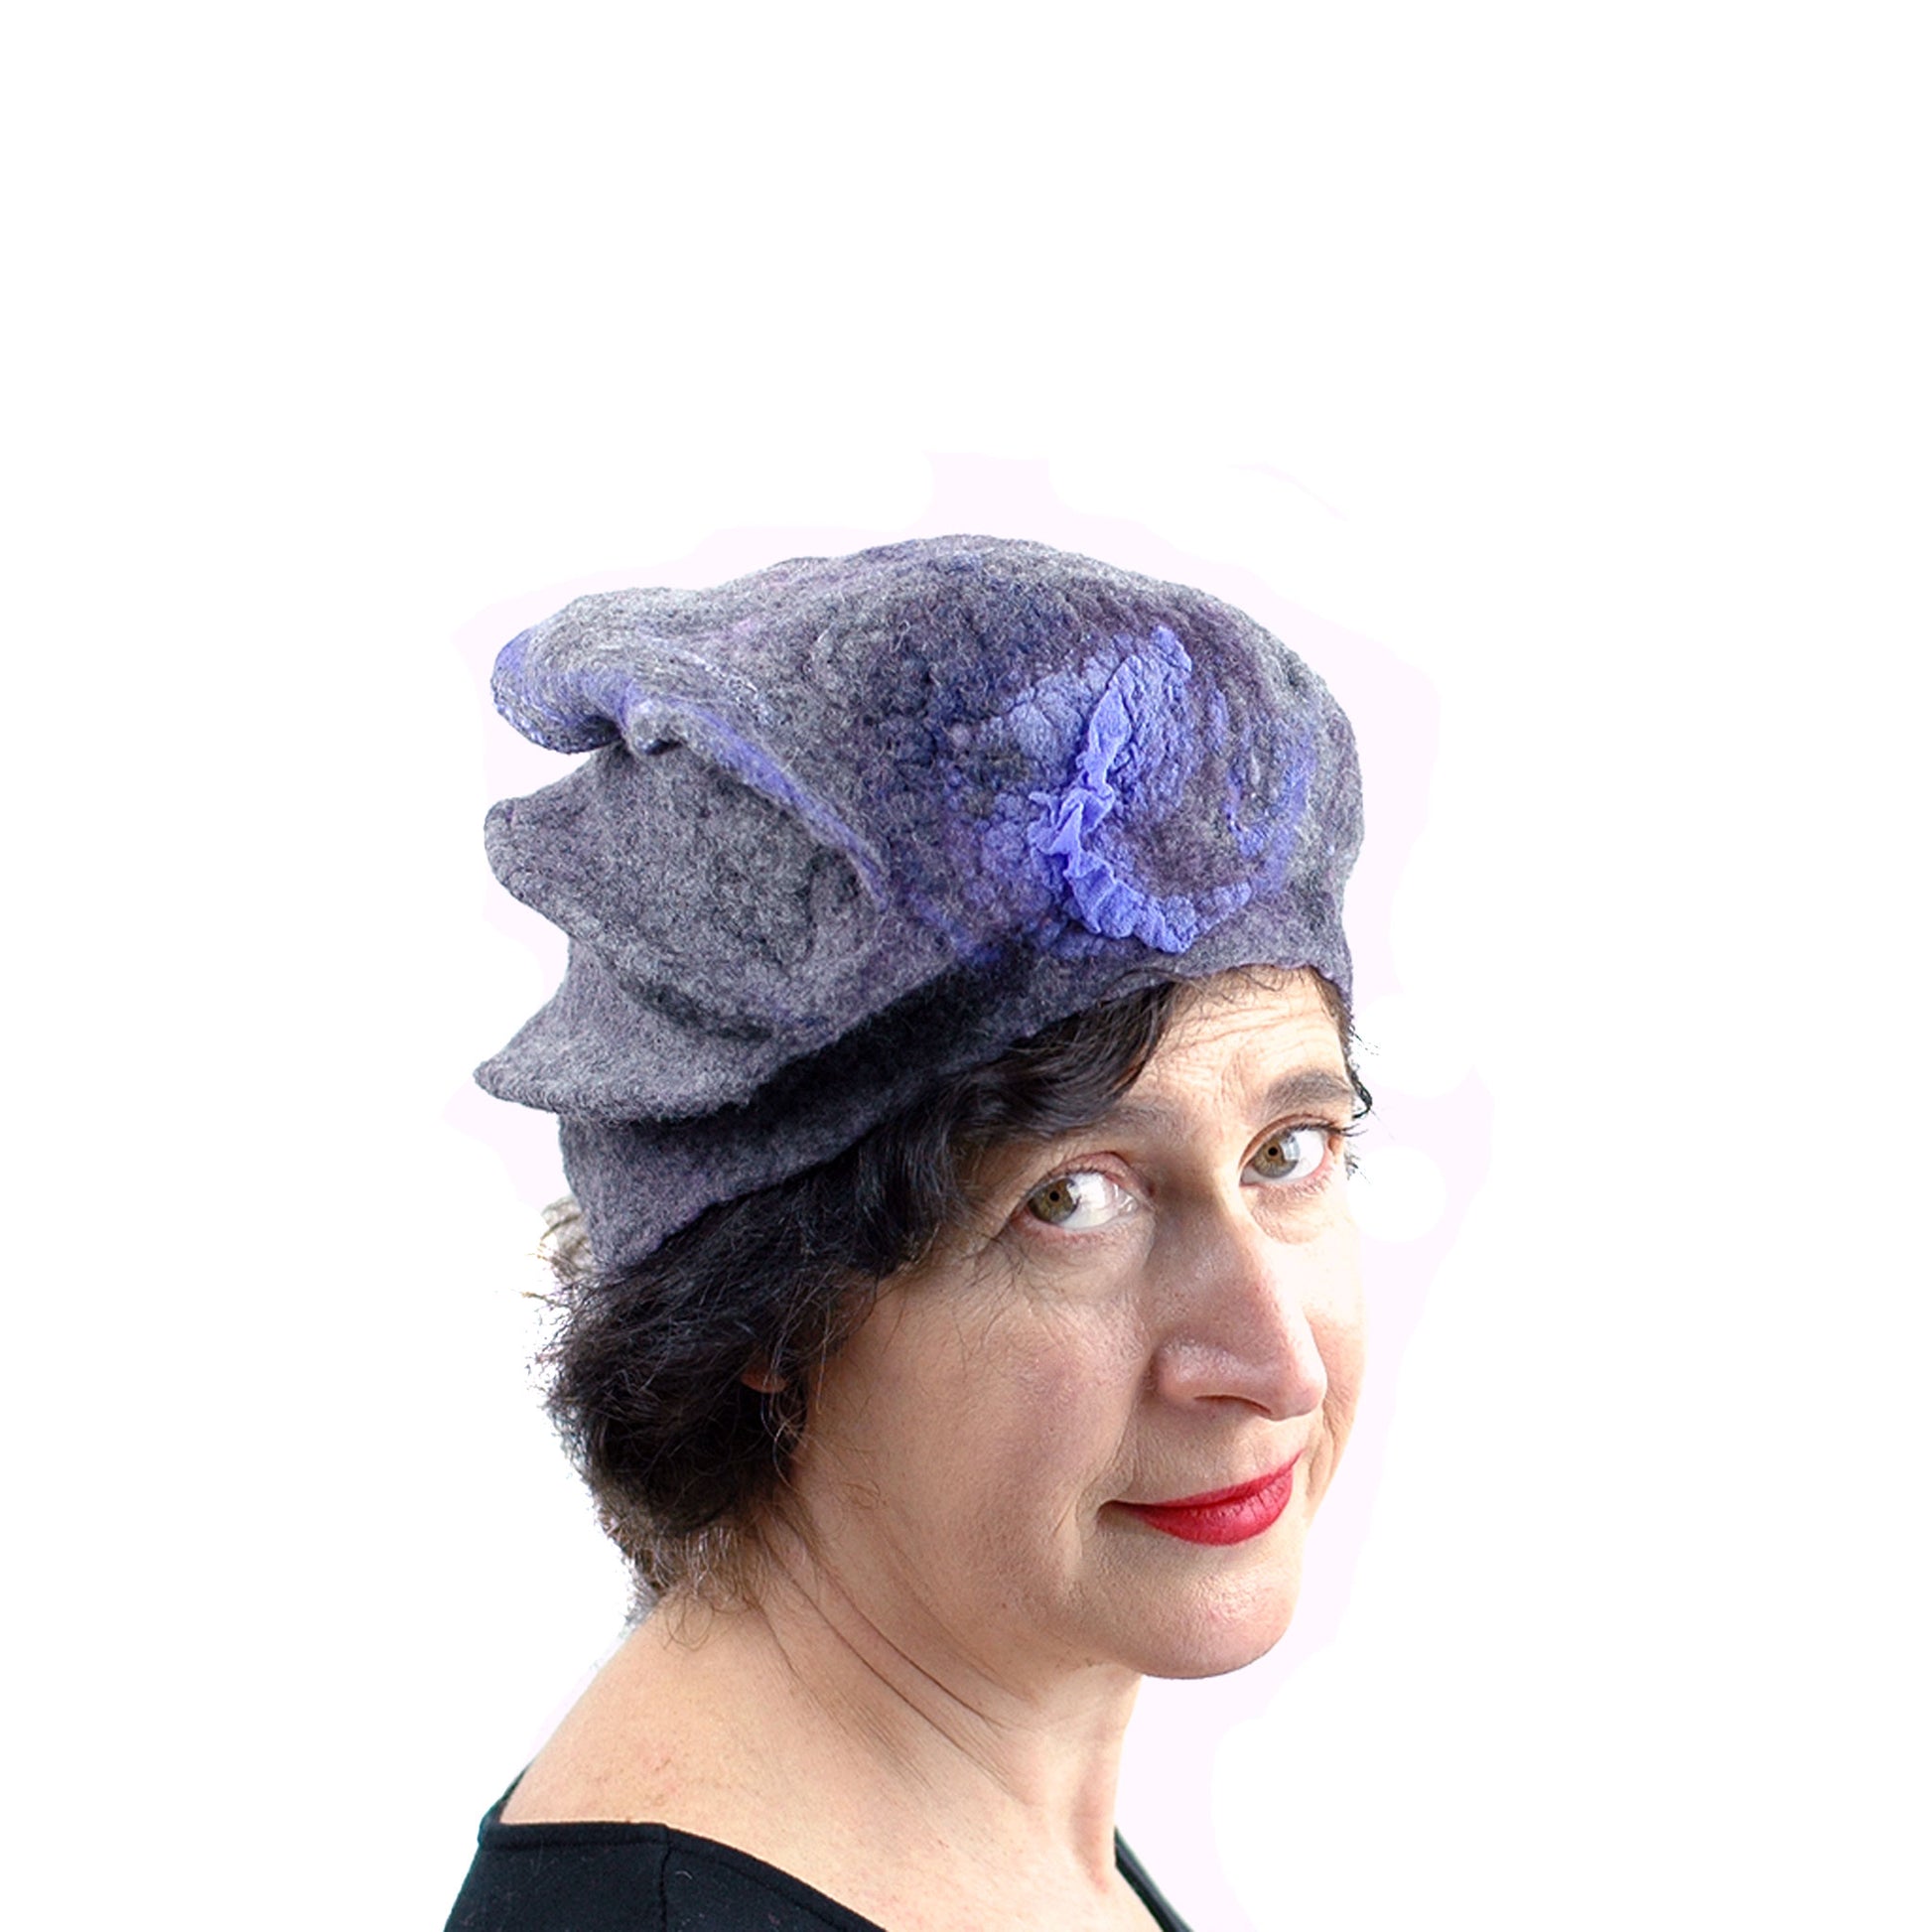 Gray Gotland Wool Beret with Purple Ruffle - side view